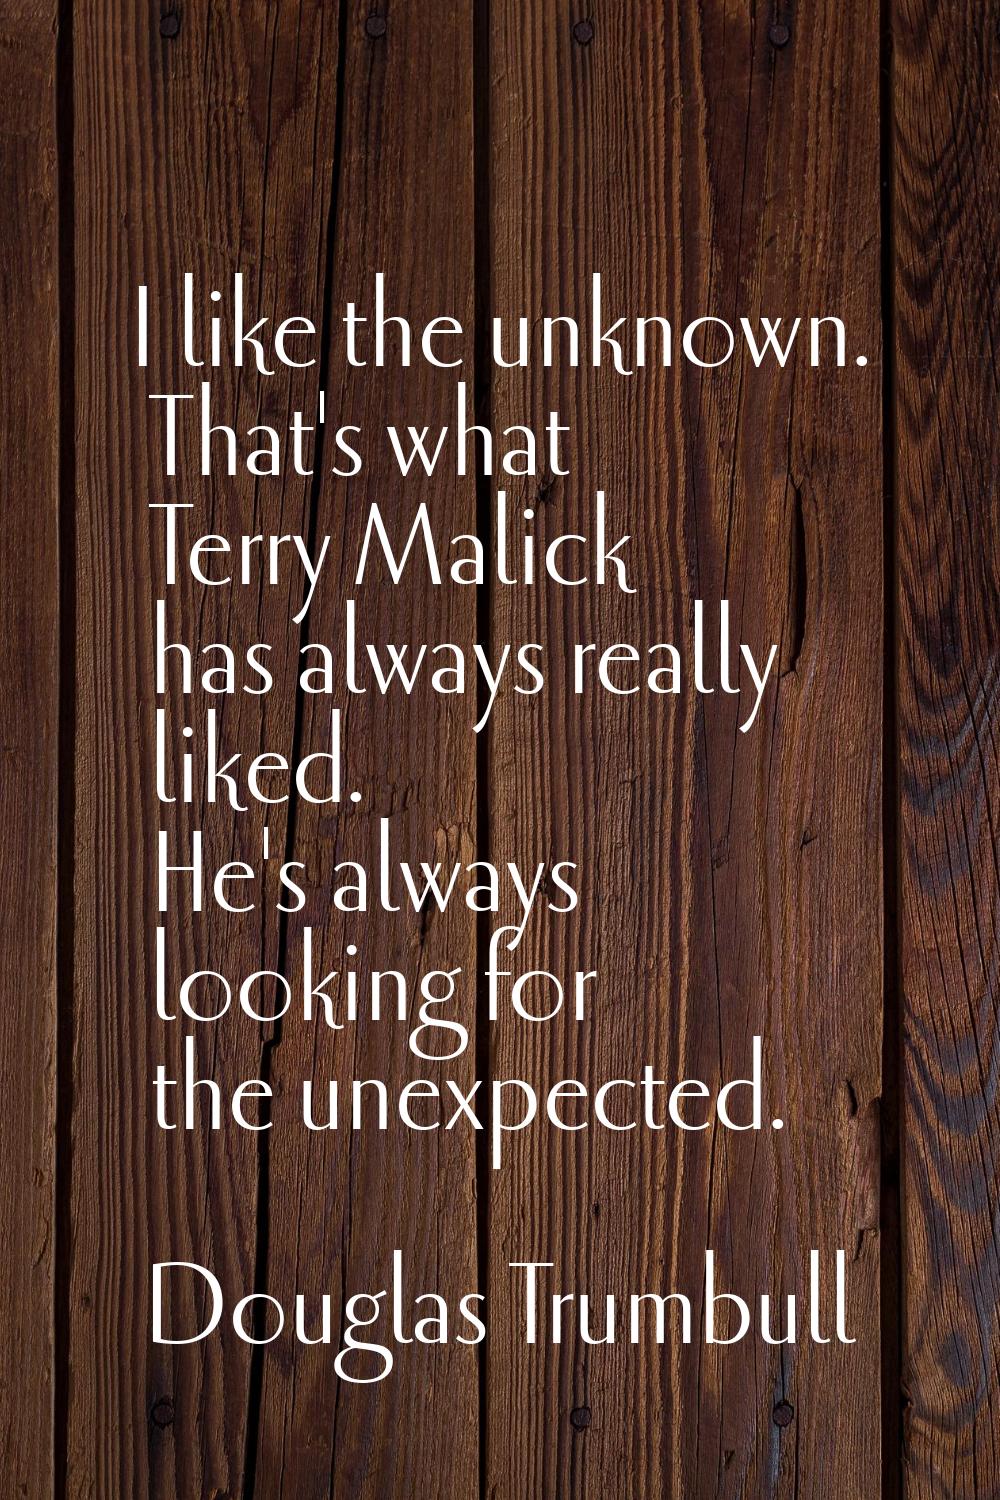 I like the unknown. That's what Terry Malick has always really liked. He's always looking for the u